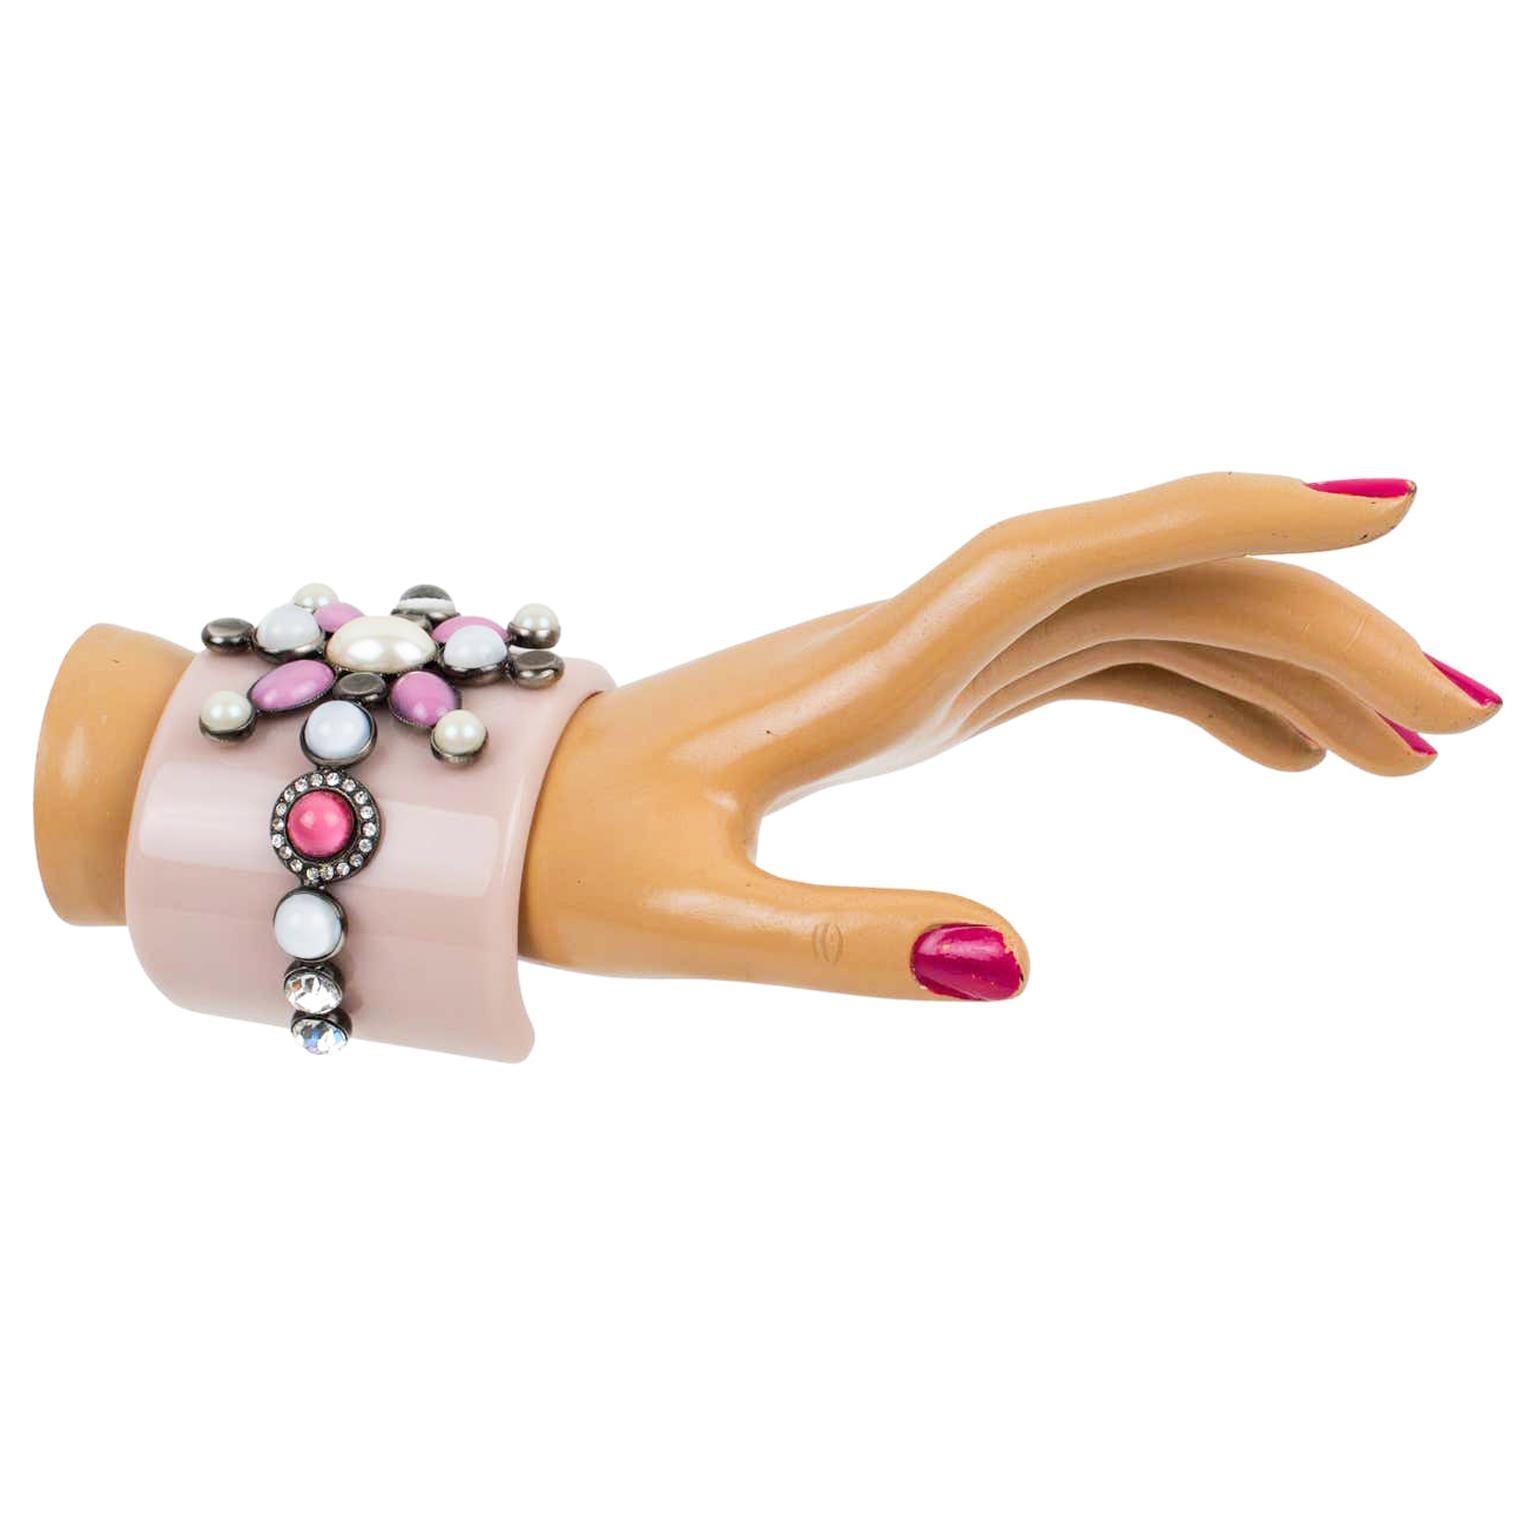 Emilio Pucci Jeweled Pale Pink Resin Bracelet Bangle For Sale 3